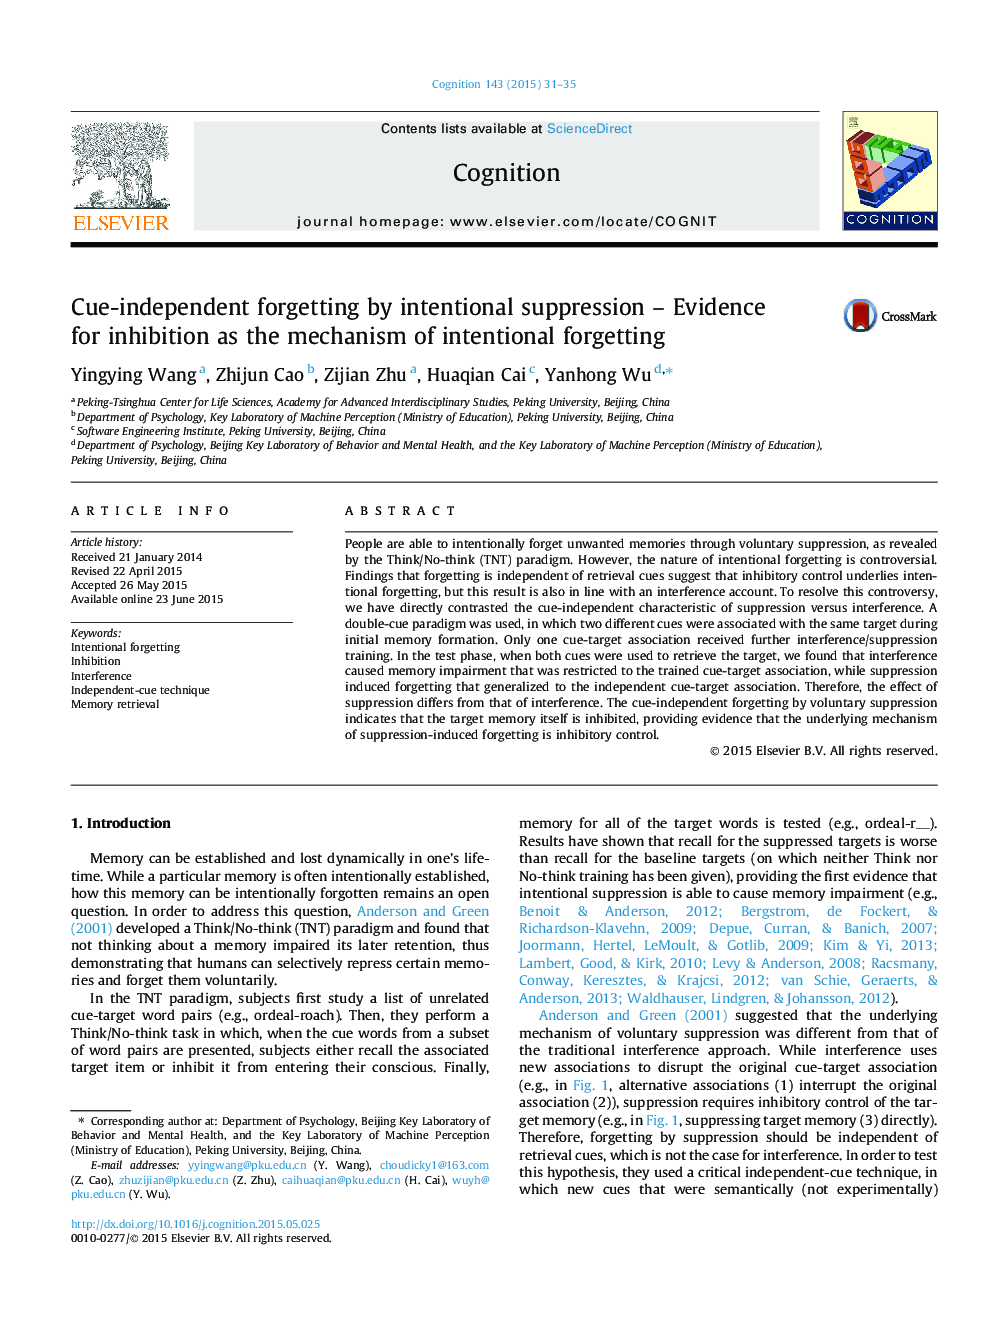 Cue-independent forgetting by intentional suppression - Evidence for inhibition as the mechanism of intentional forgetting